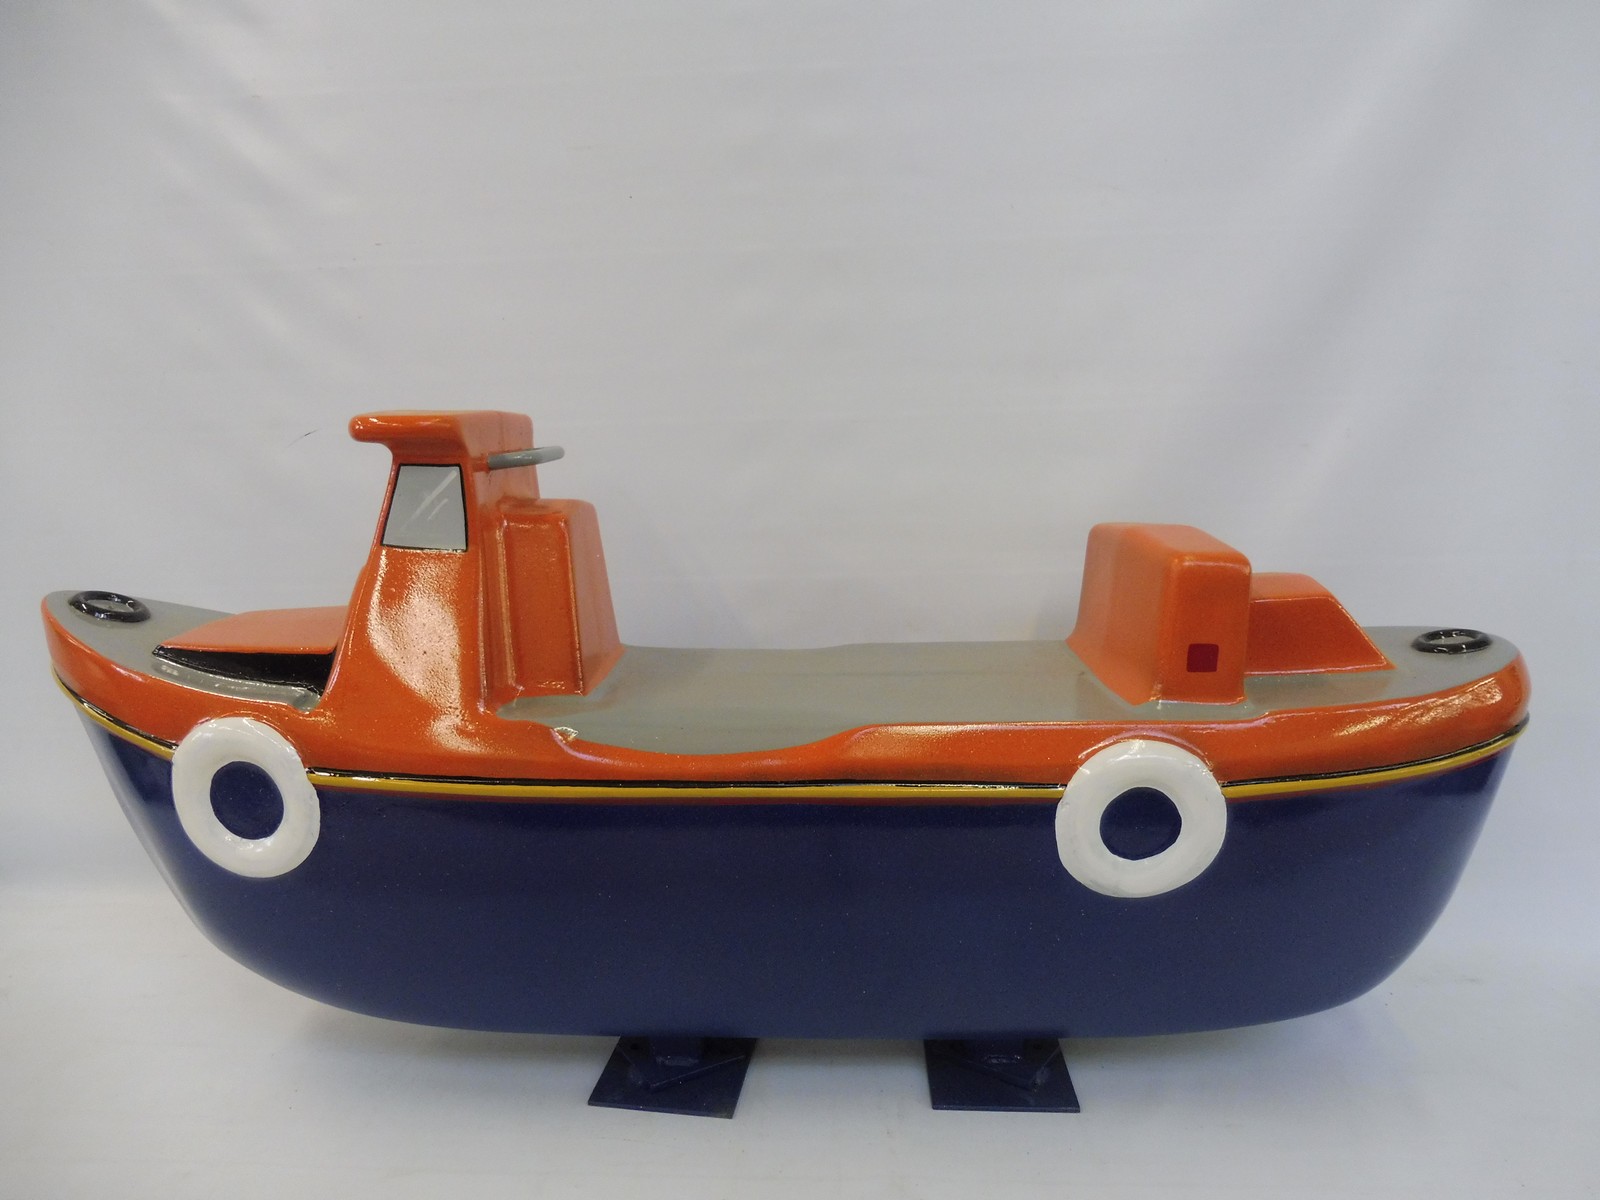 A front of house or display model for the Royal Lifeboat Association, excellent bright paintwork.